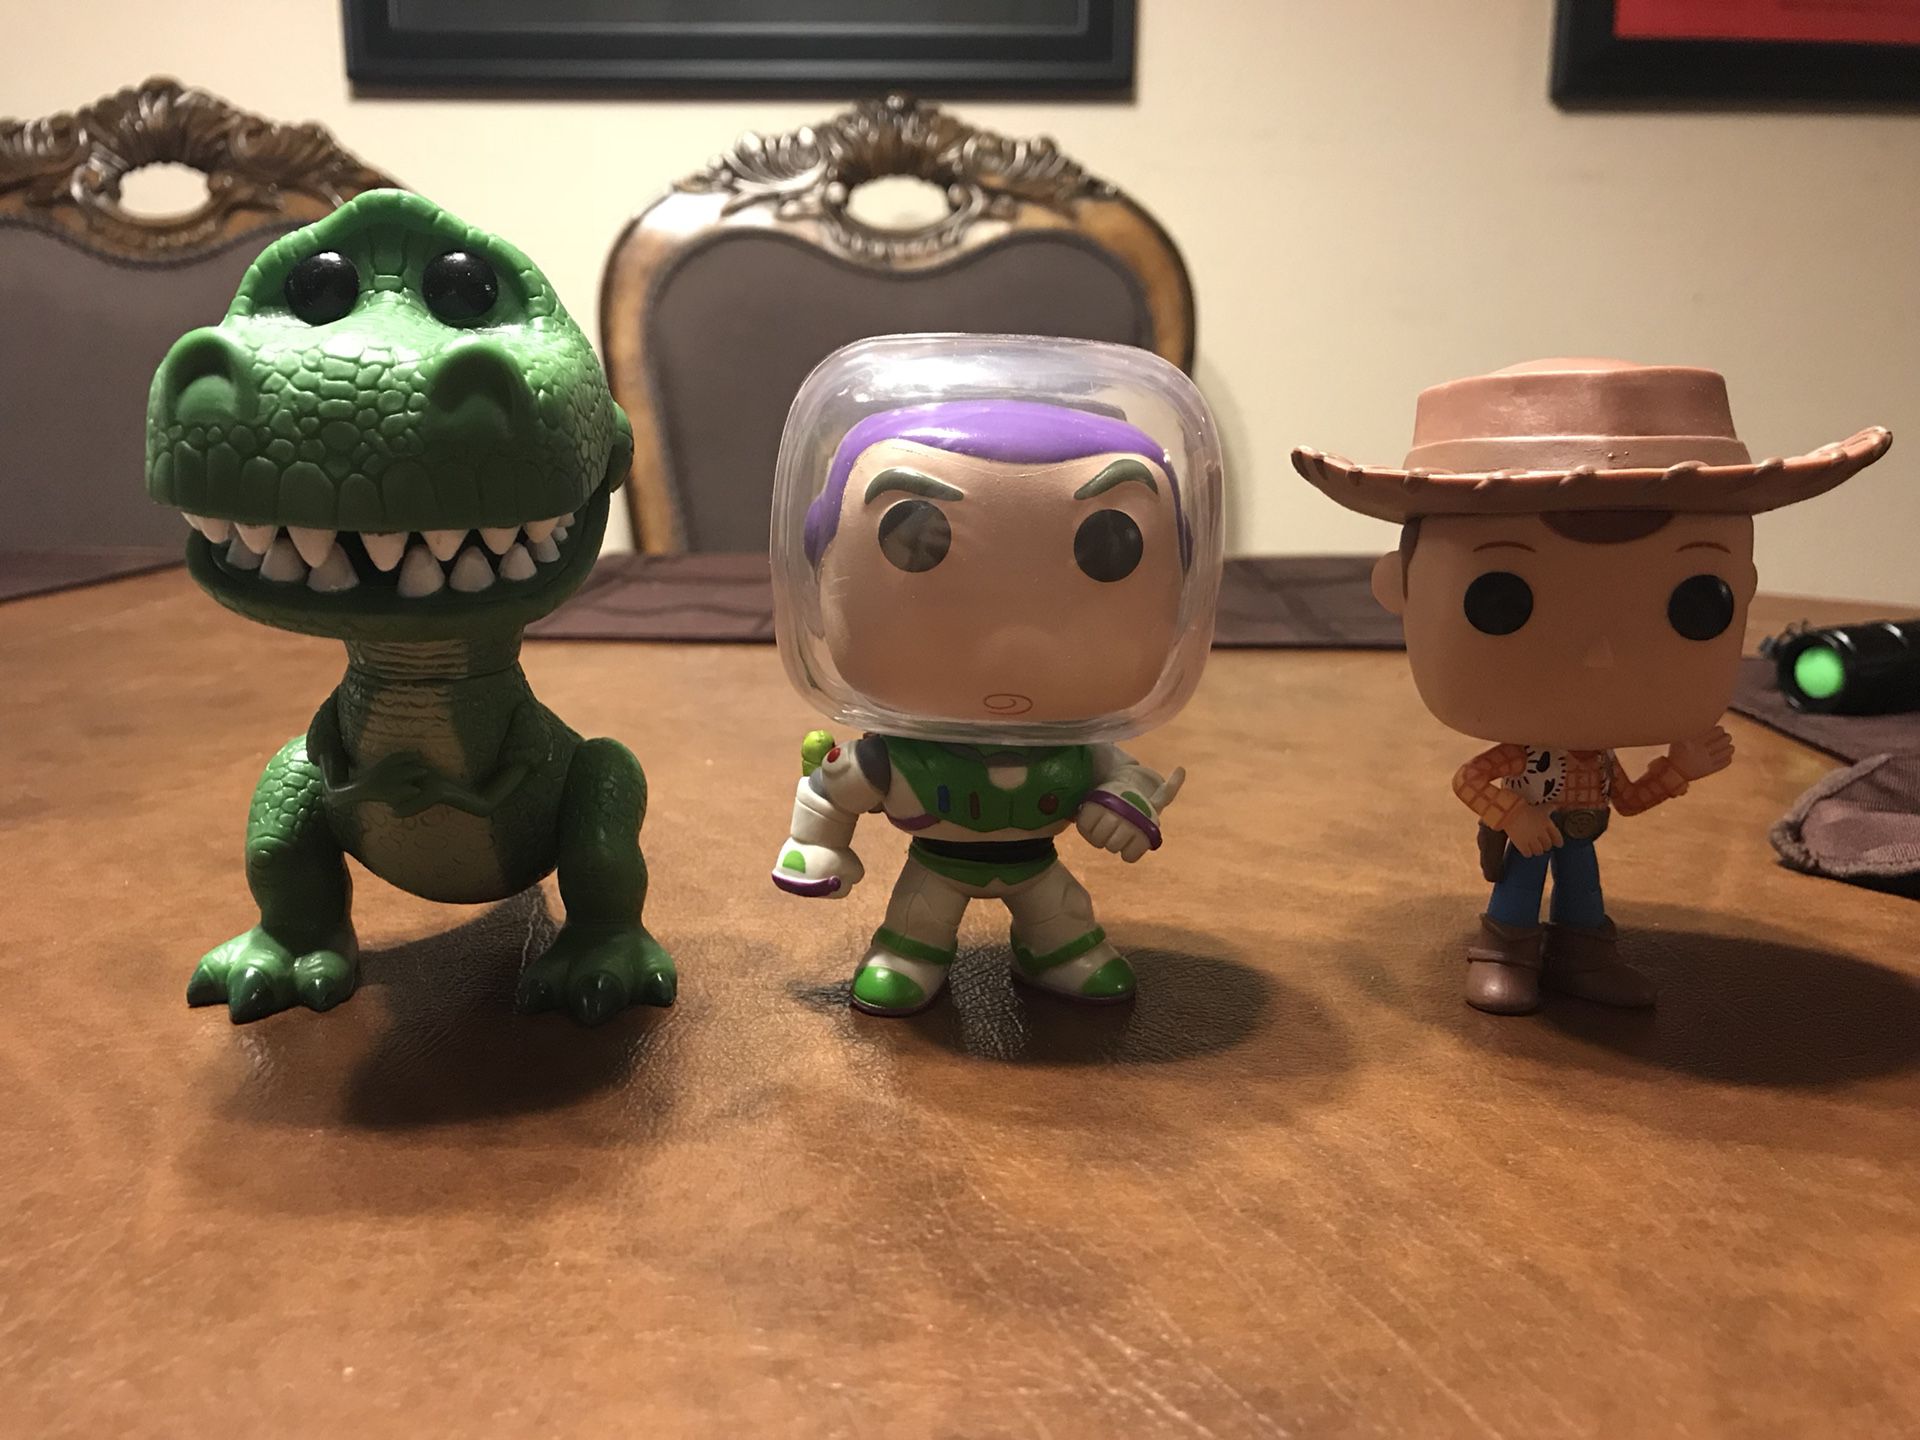 Toy story pop figures